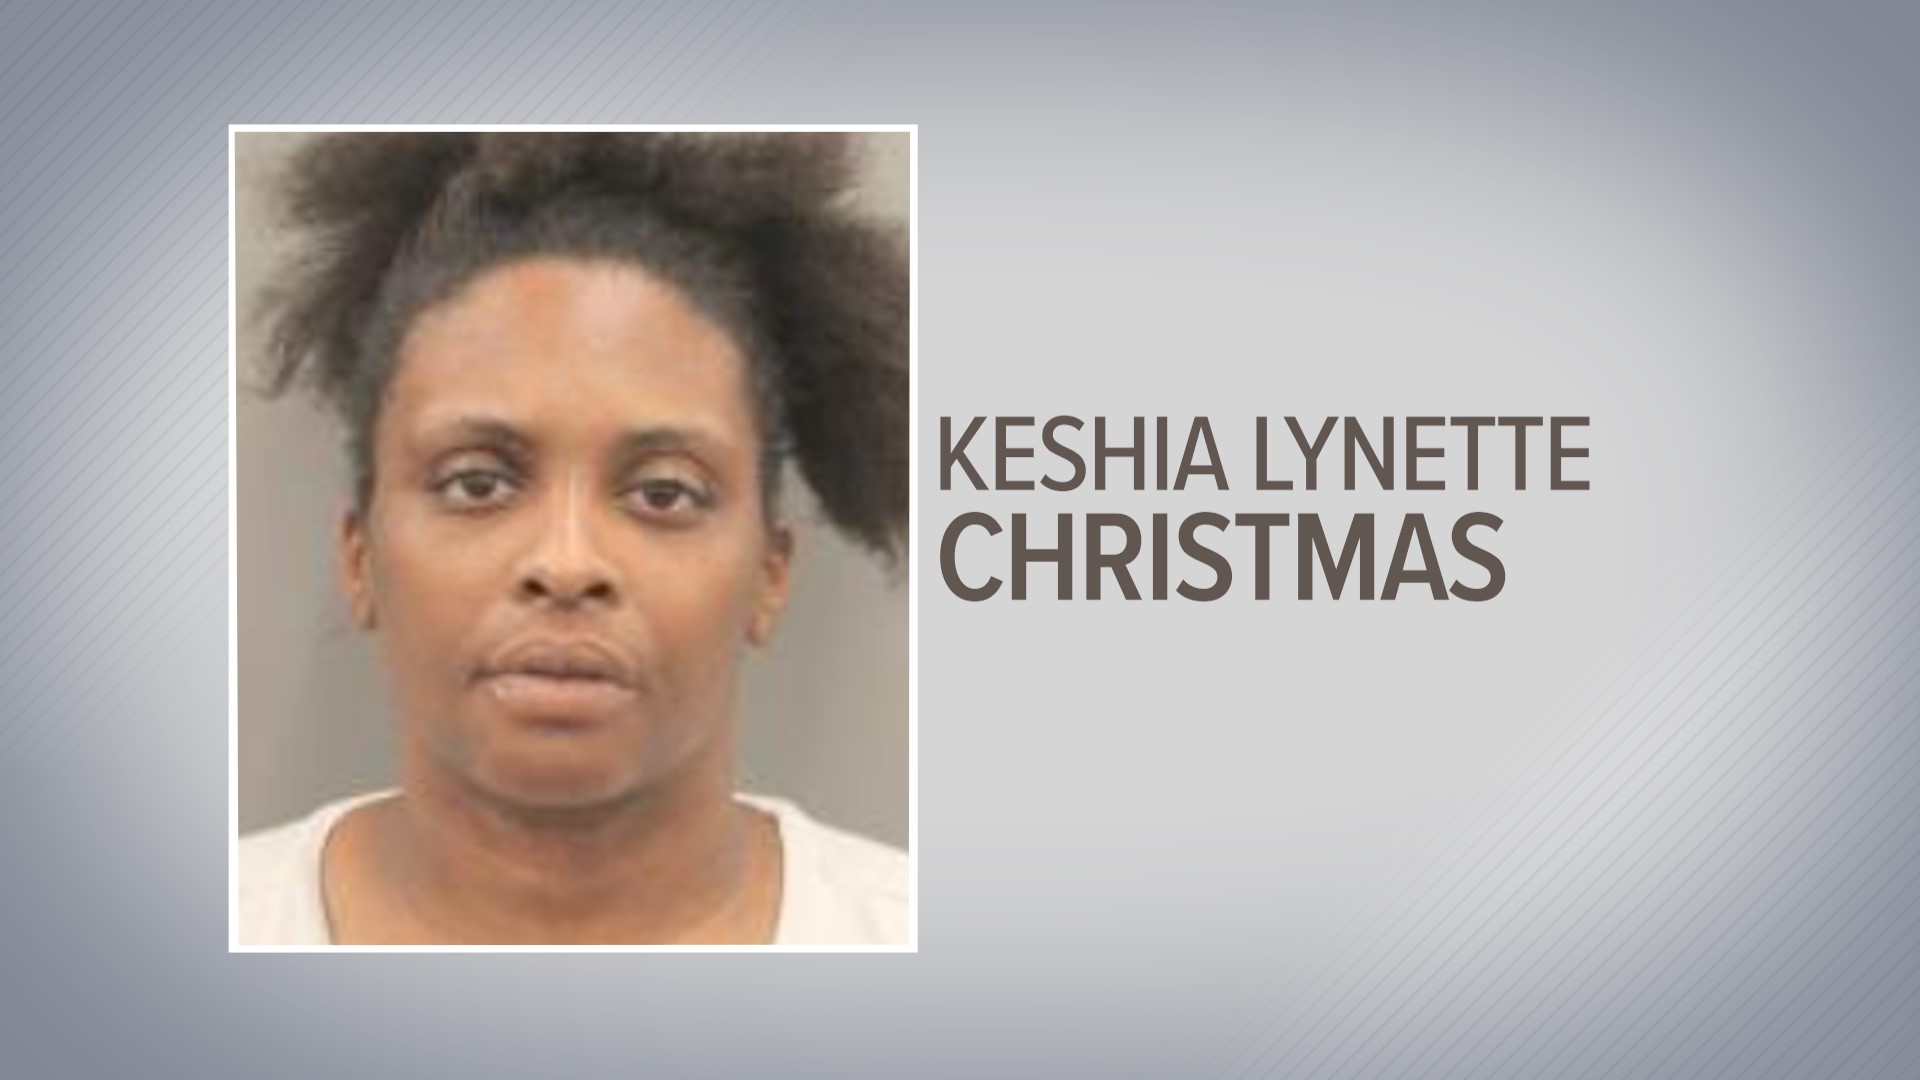 The documents show that Keshia Lynette Christmas was told she was fired before the alleged attack took place.